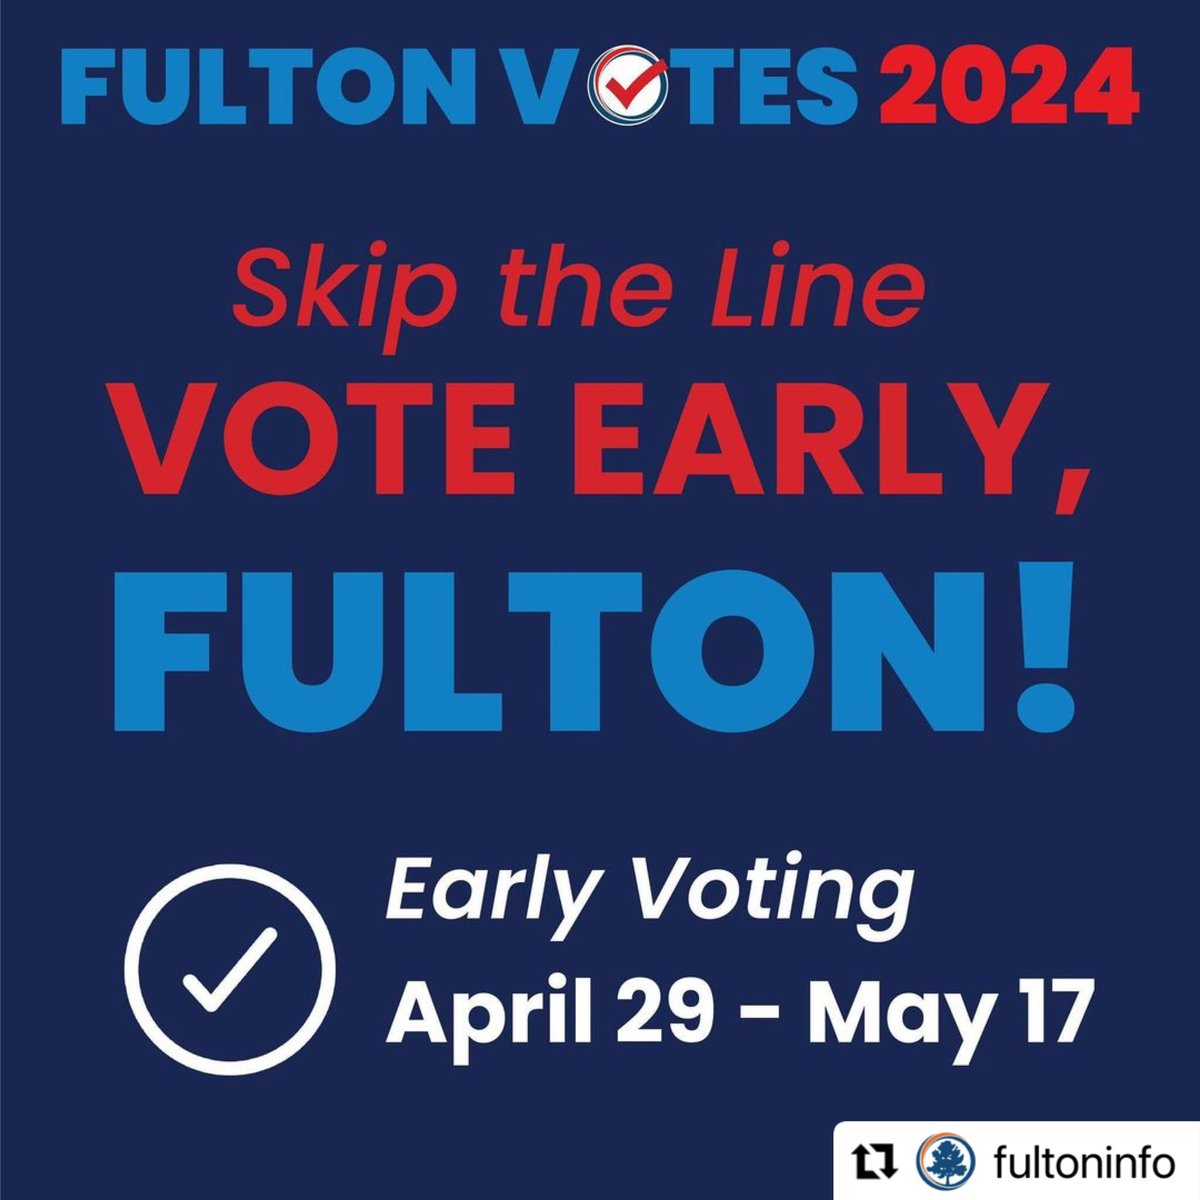 🗳️ Skip the line and vote early for the May 21 General Primary Election in Fulton County!
Find your nearest polling location and hours at fultoncountyga.gov/voteearly or download the free Fulton Votes app for your phone. #FultonVotes